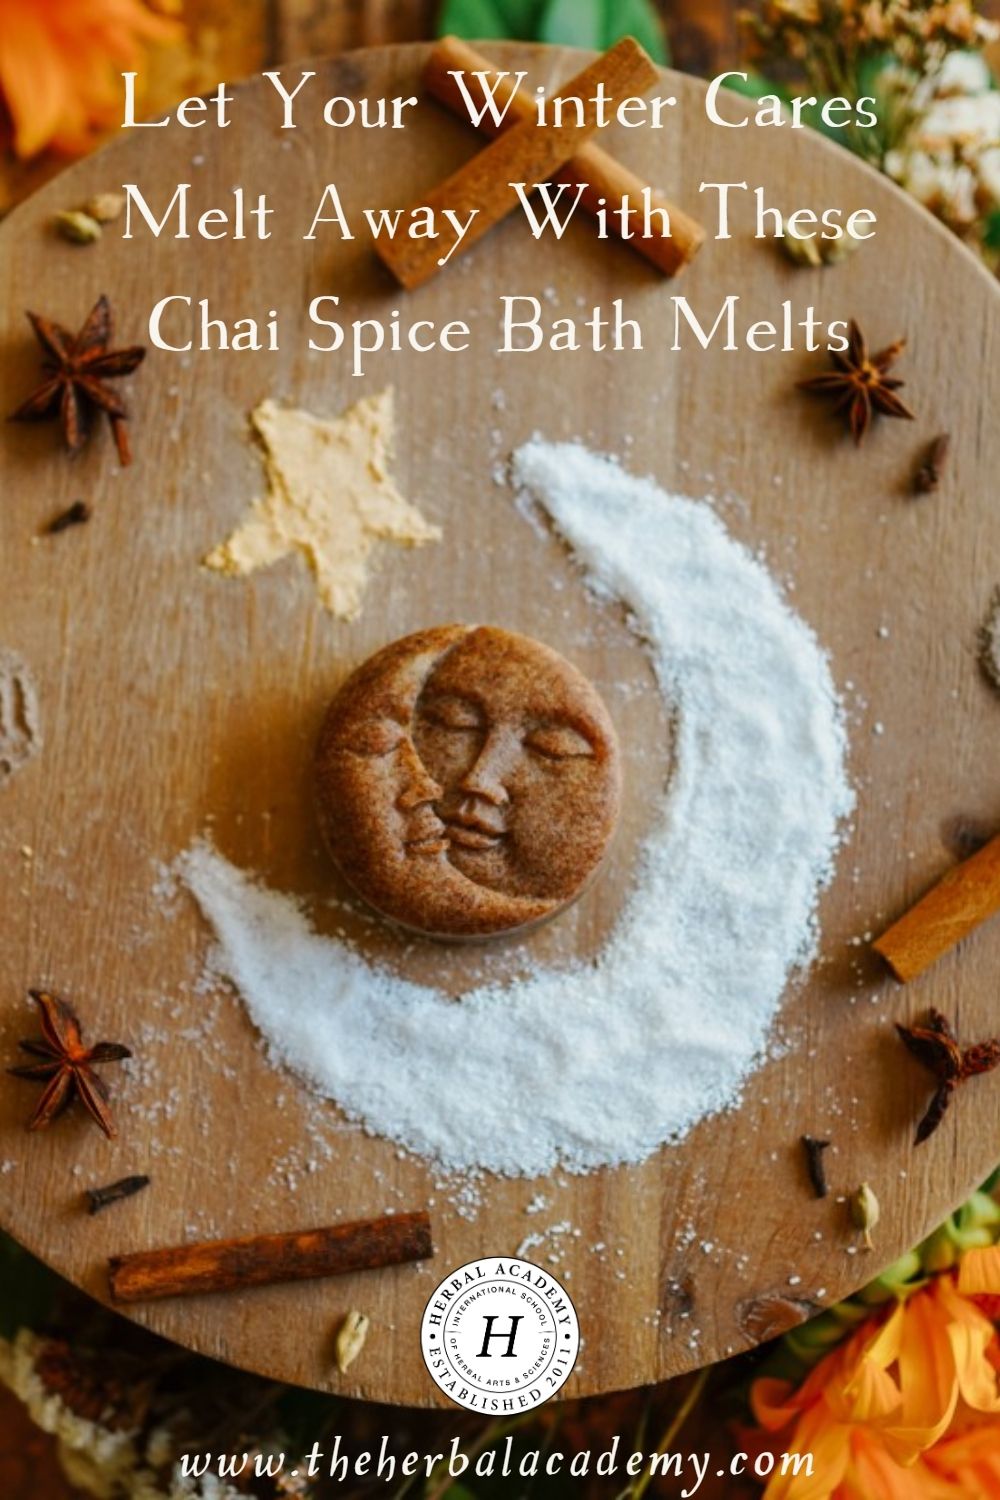 Let Your Winter Cares Melt Away With These Chai Spice Bath Melts | Herbal Academy | By creating your own batch of bath melts, you can let your cares melt away in soothing waters, for which your body and mind will be thankful.